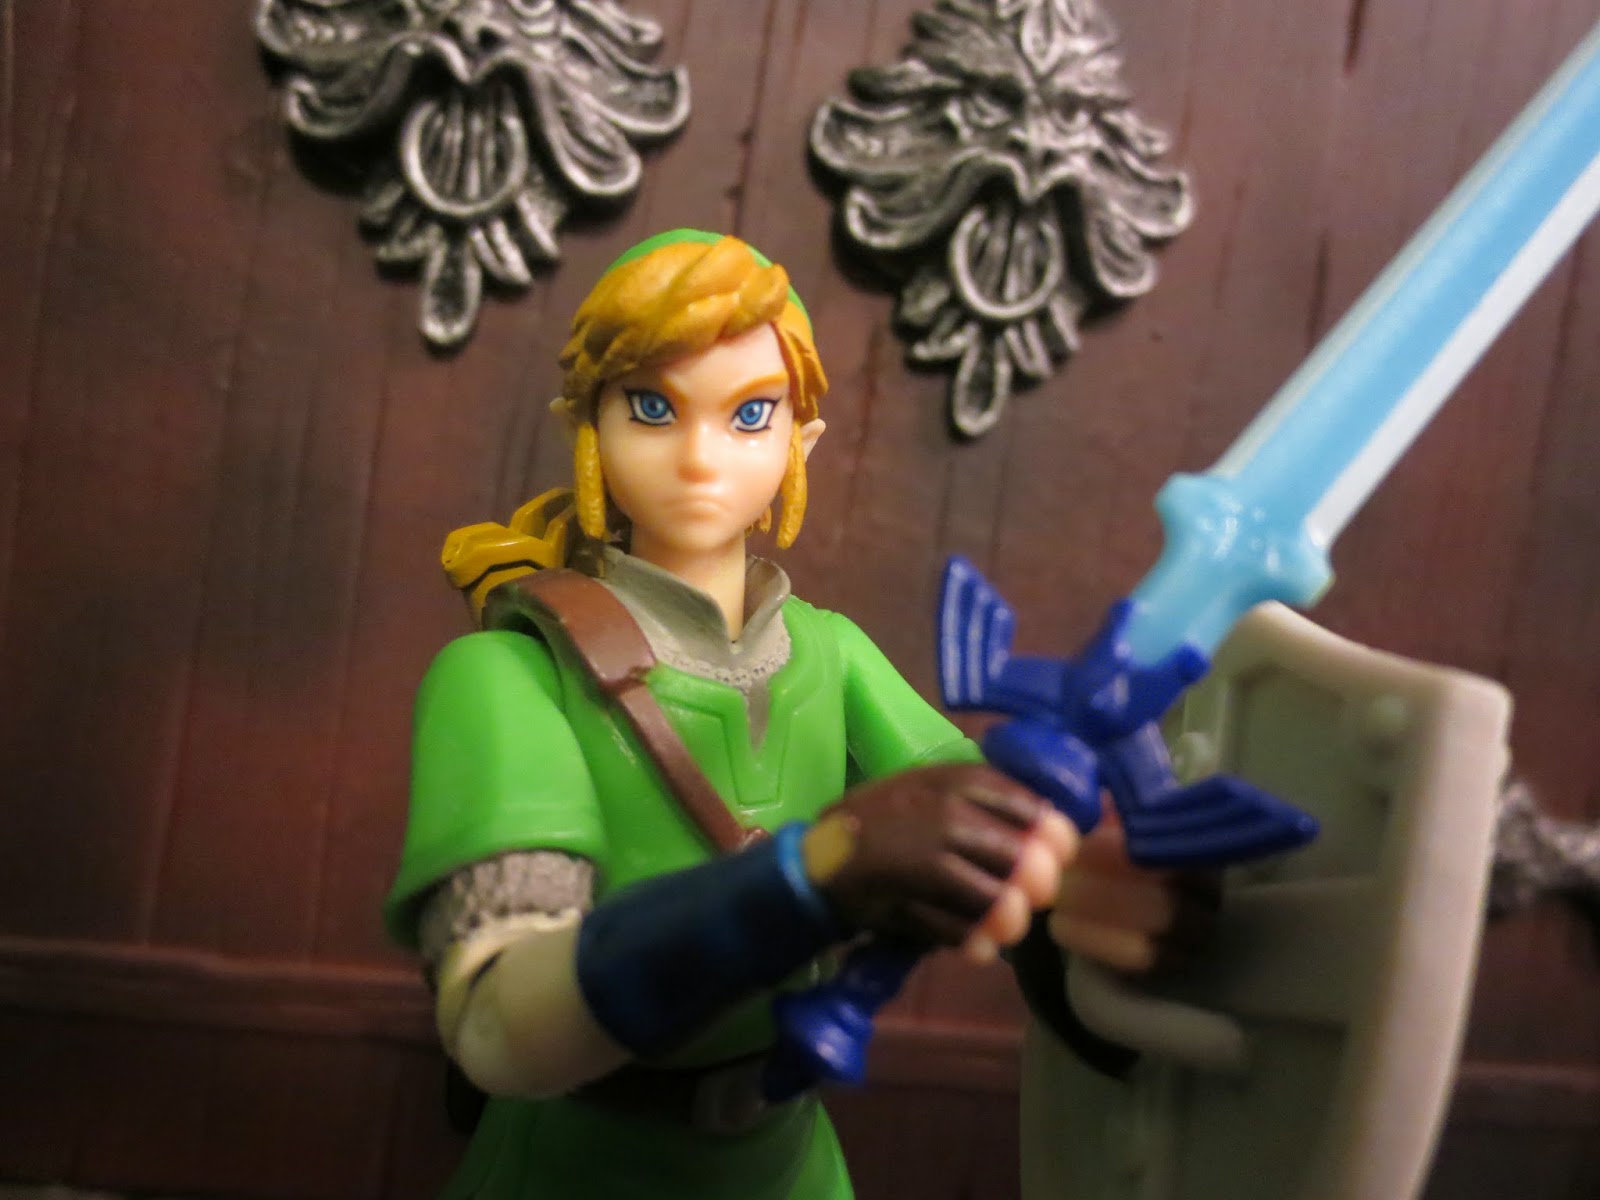 Action Figure Barbecue: Action Figure Review: The Legend of Zelda